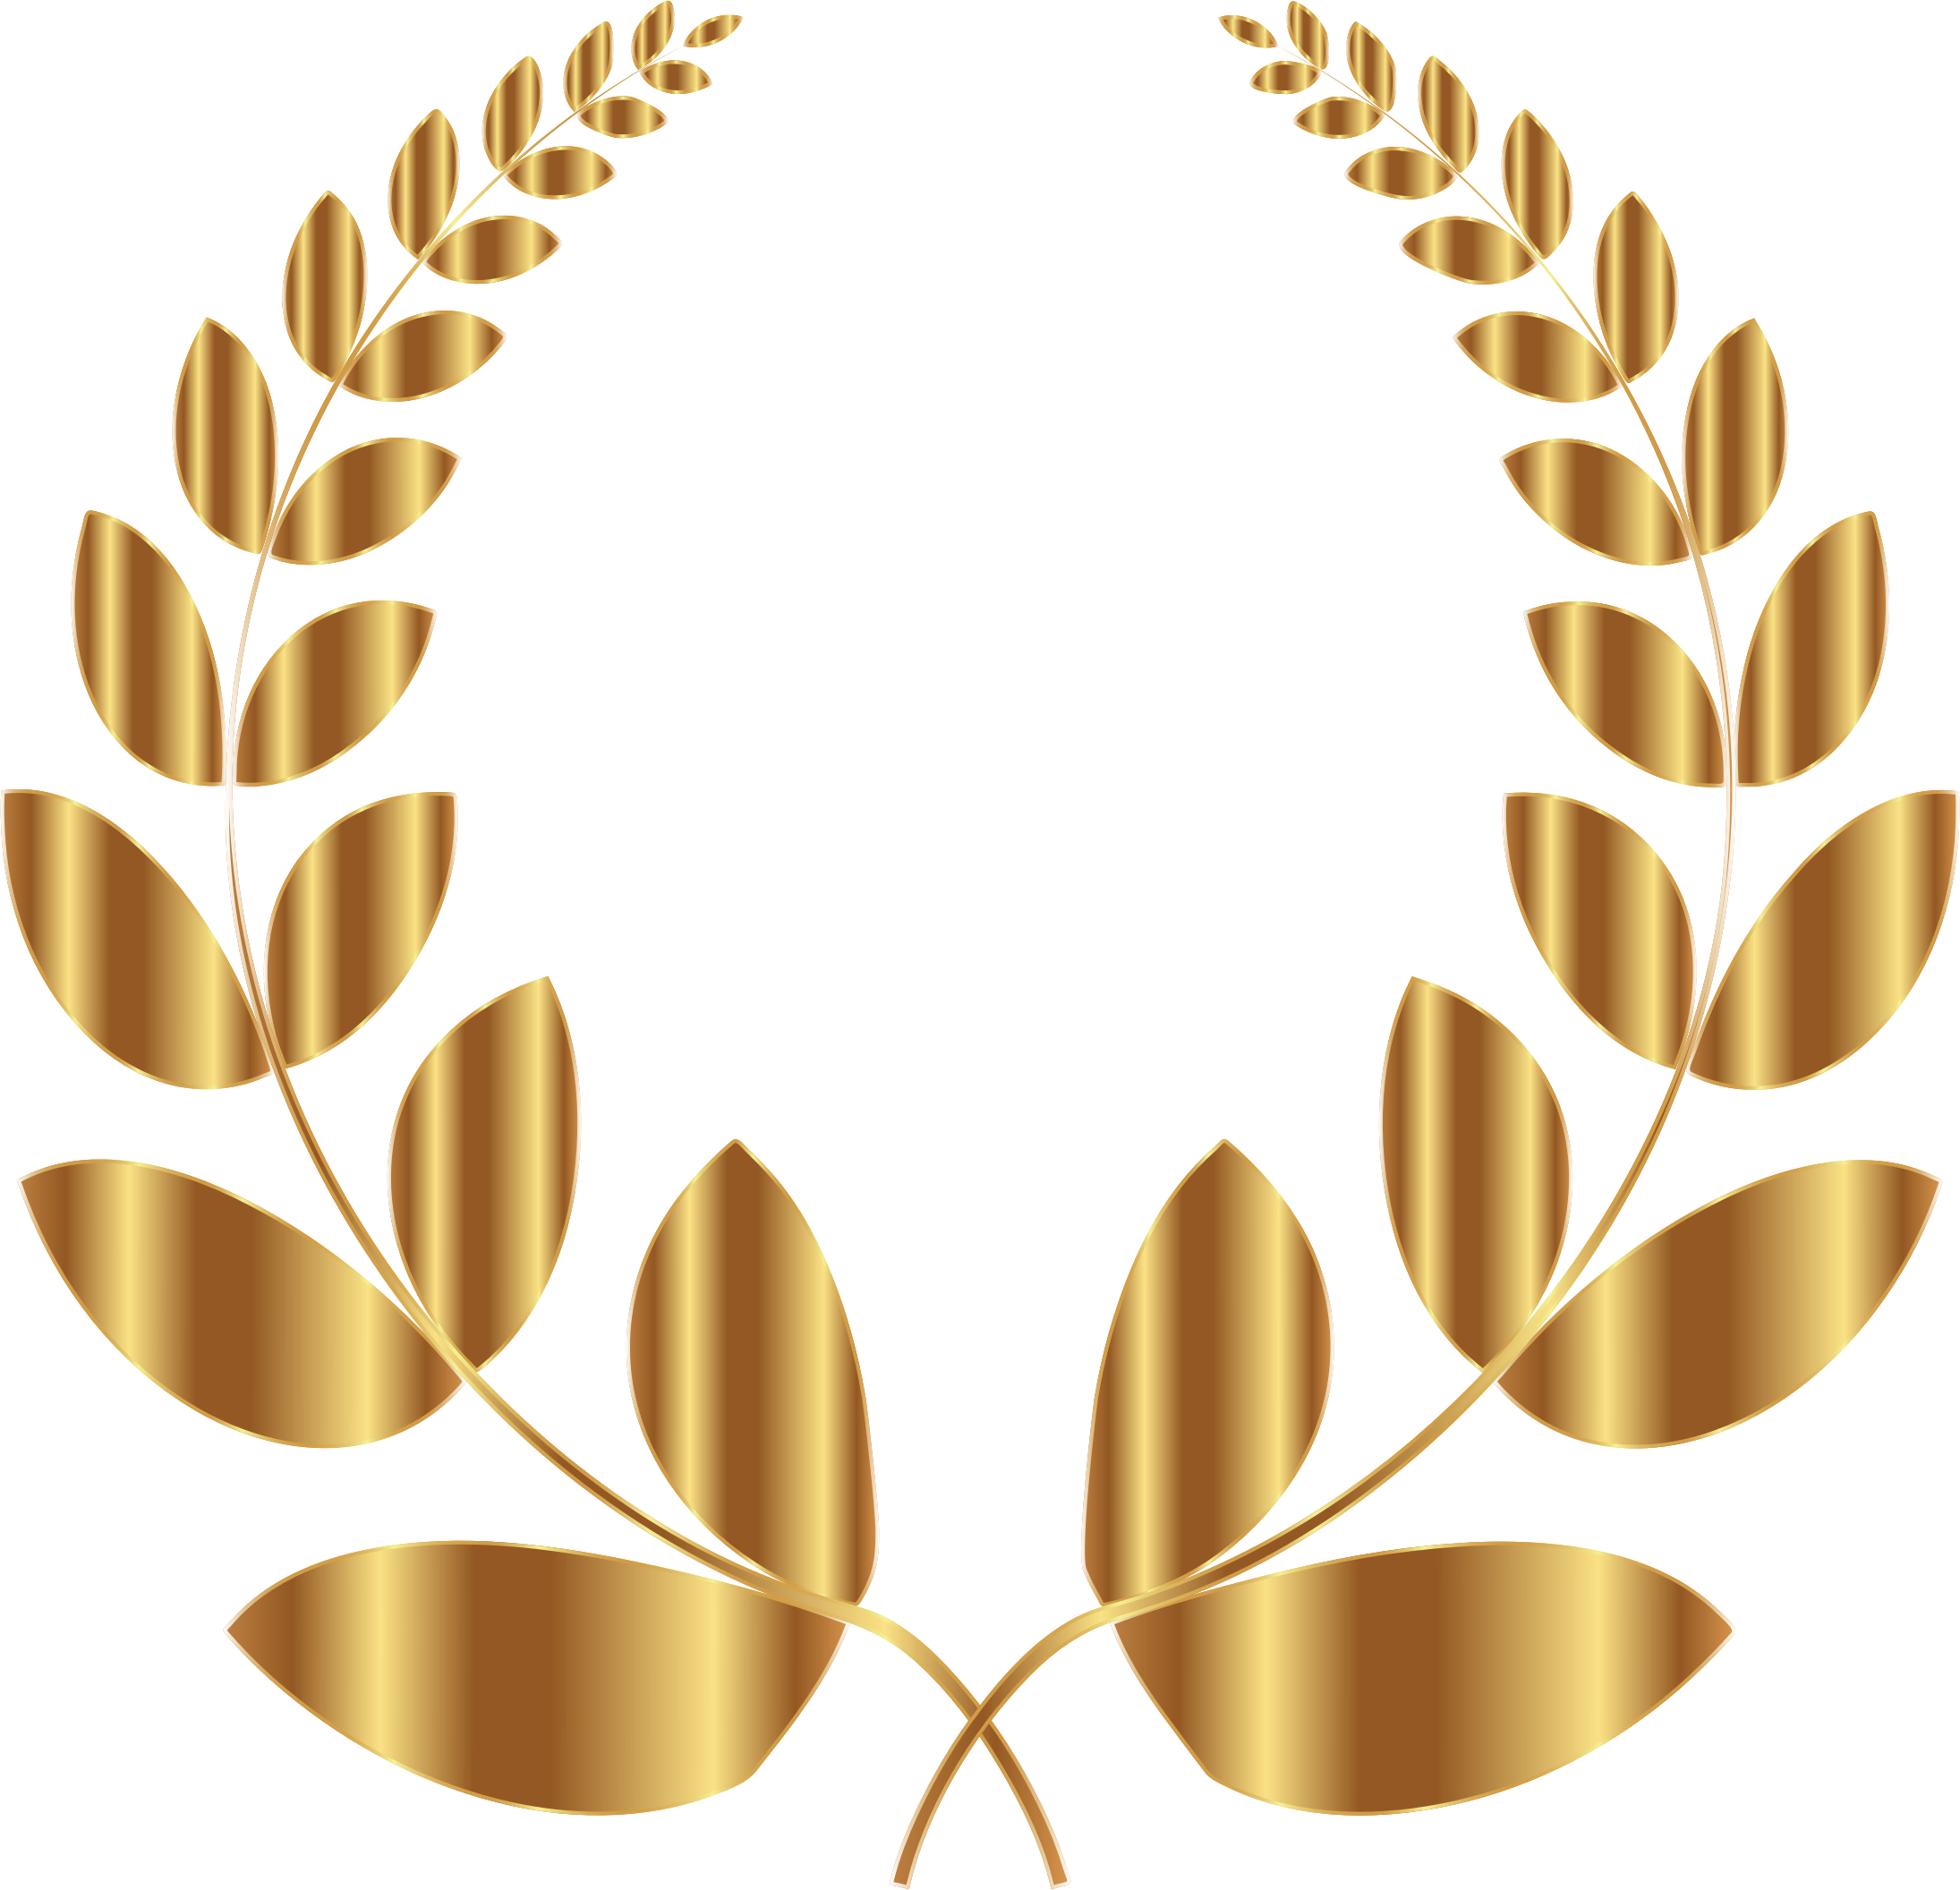 This Free Icons Png Design Of Gold Laurel Wreath 5 - Gold Wreath Transparent Background (2190x2112)